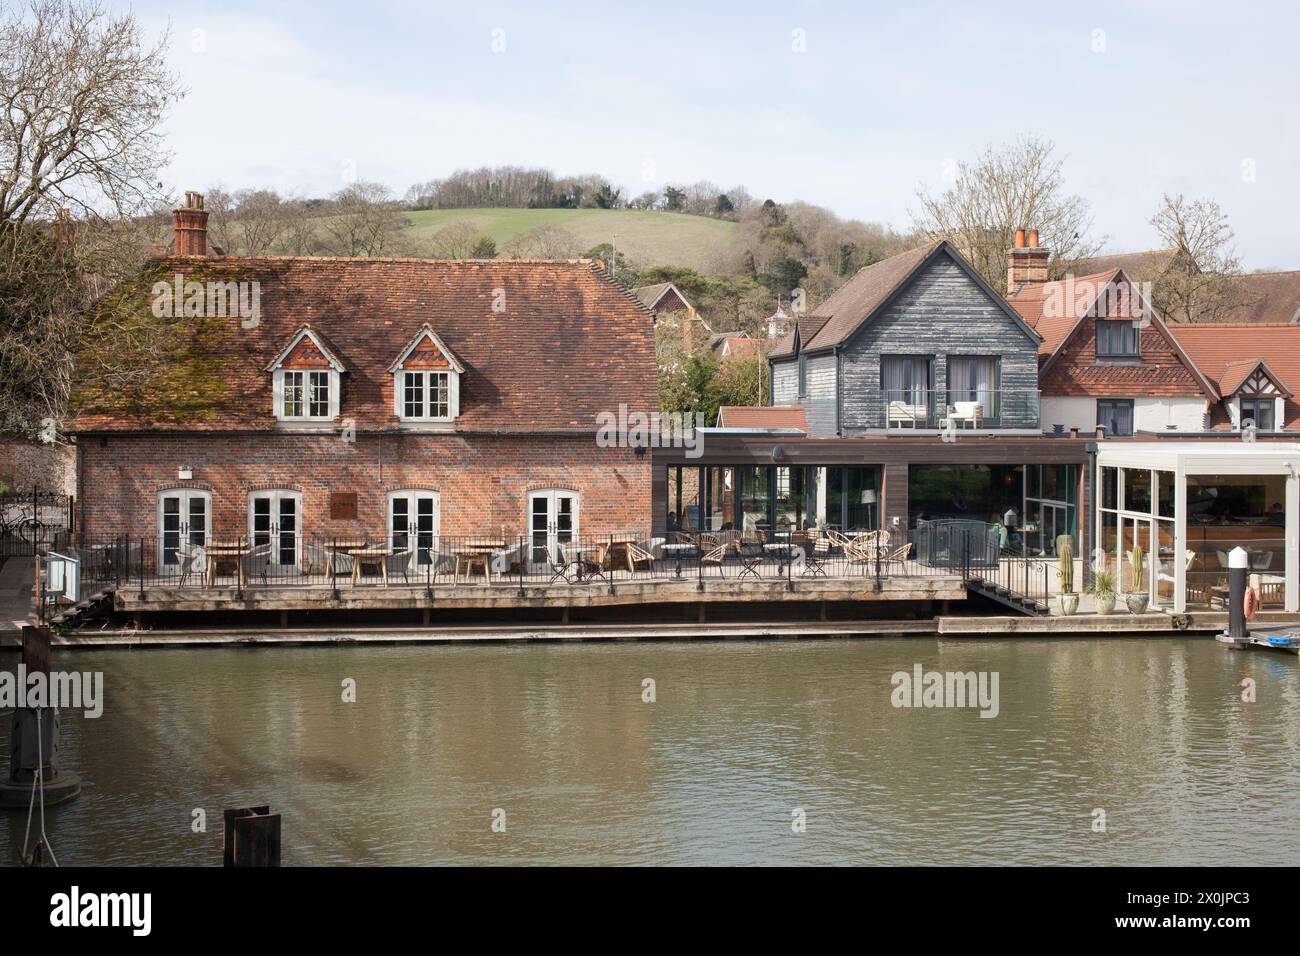 Views of The Thames at Goring in Oxfordshire in the United Kingdom Stock Photo